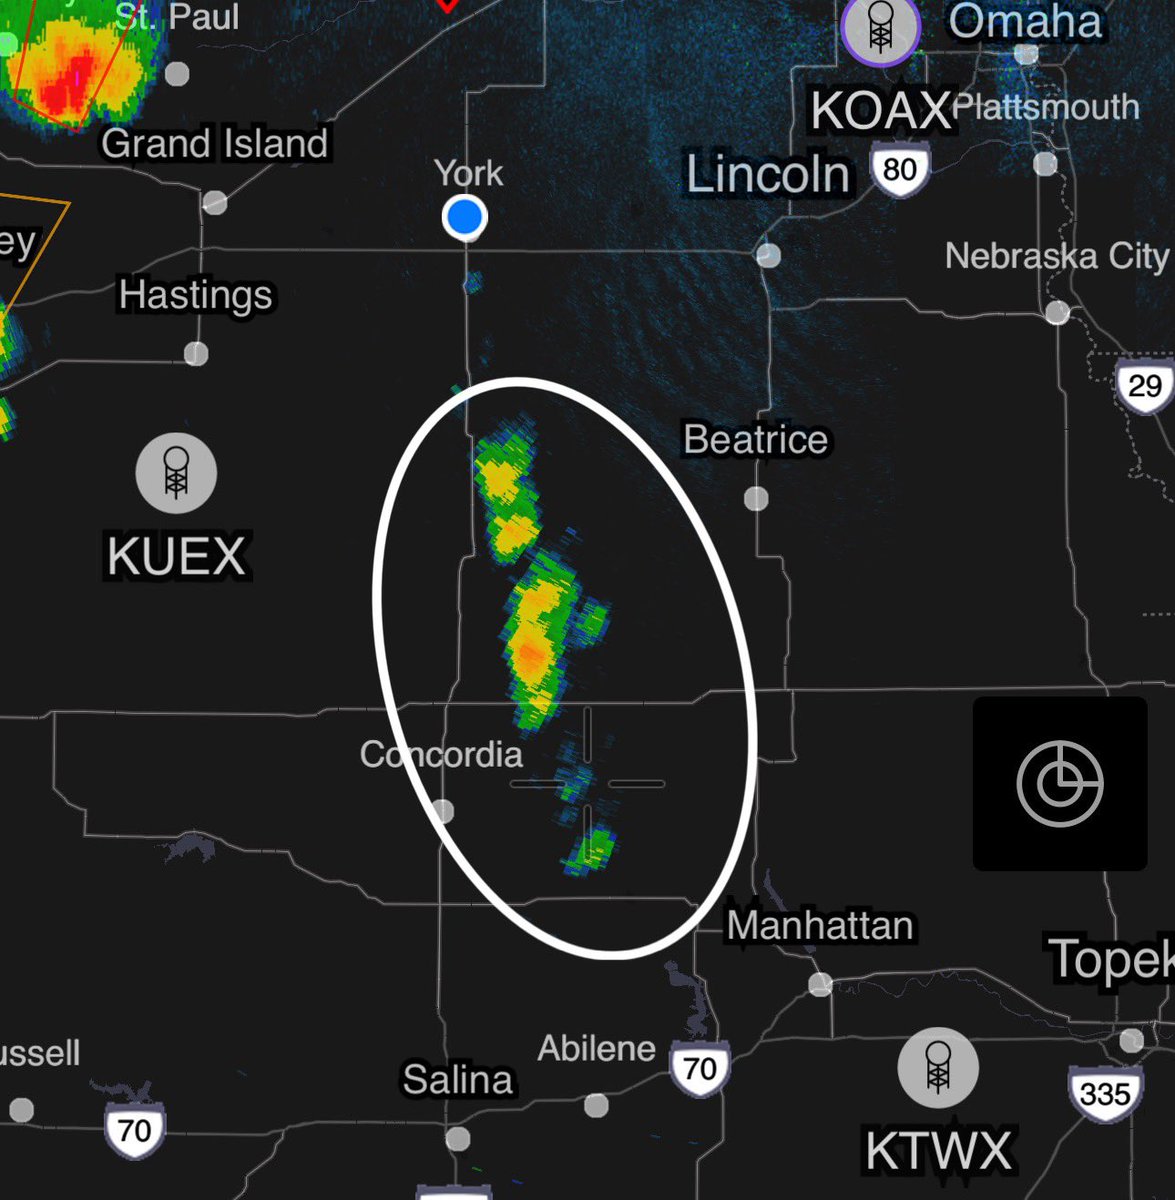 Supercells are in the process of rapidly developing along the Nebraska dryline. A tornado watch will be issued imminently. Beginning @MyRadarWX livestream soon.